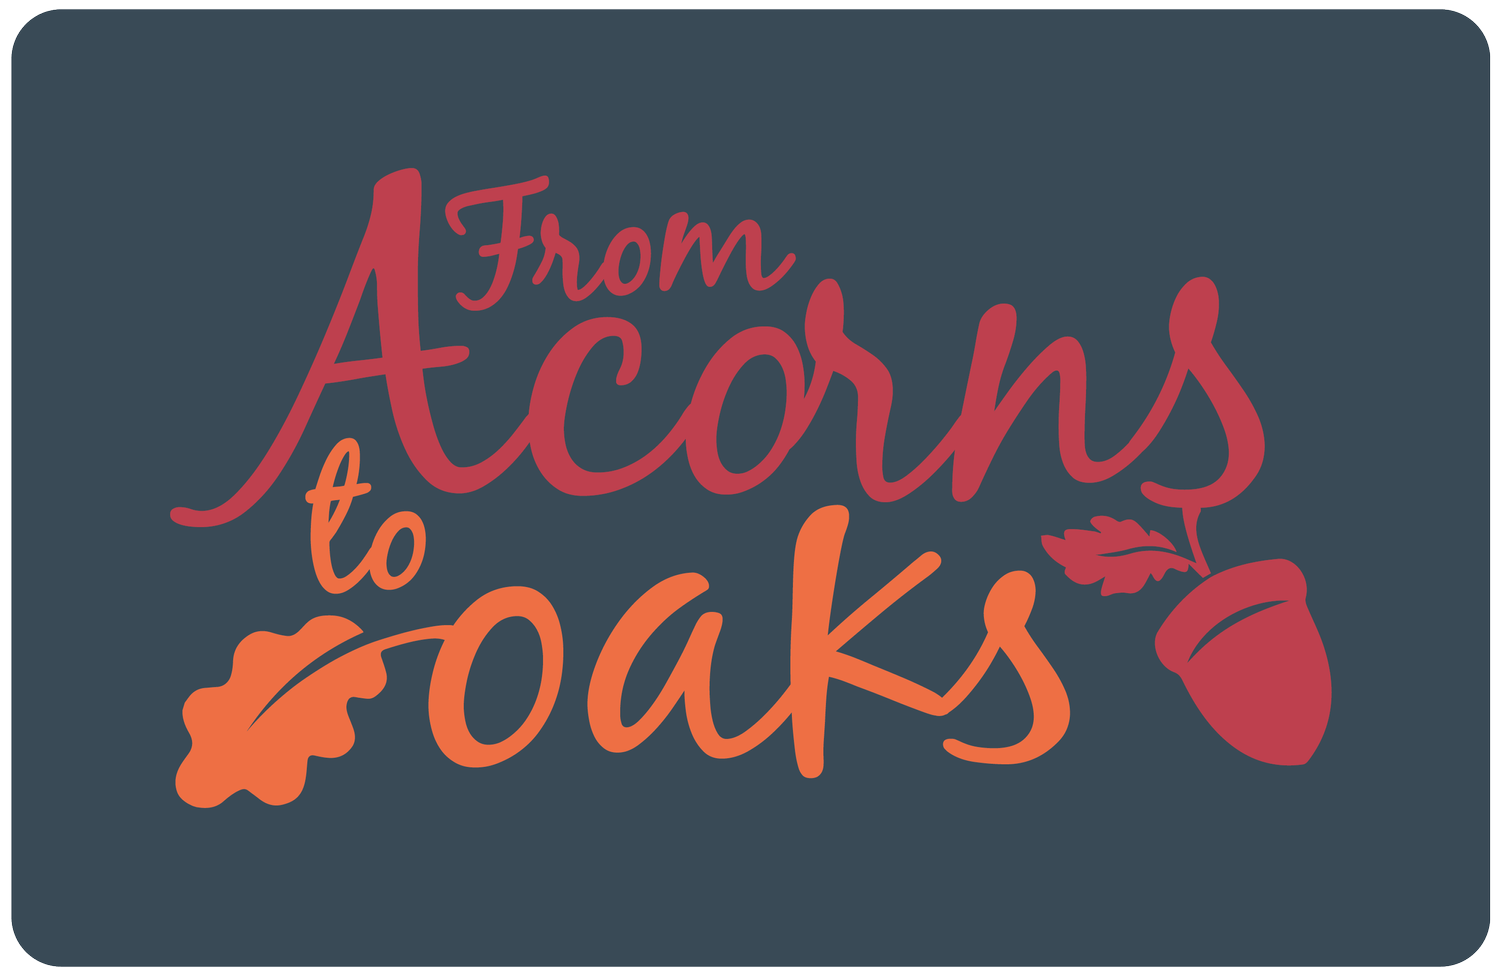 From Acorns to Oaks